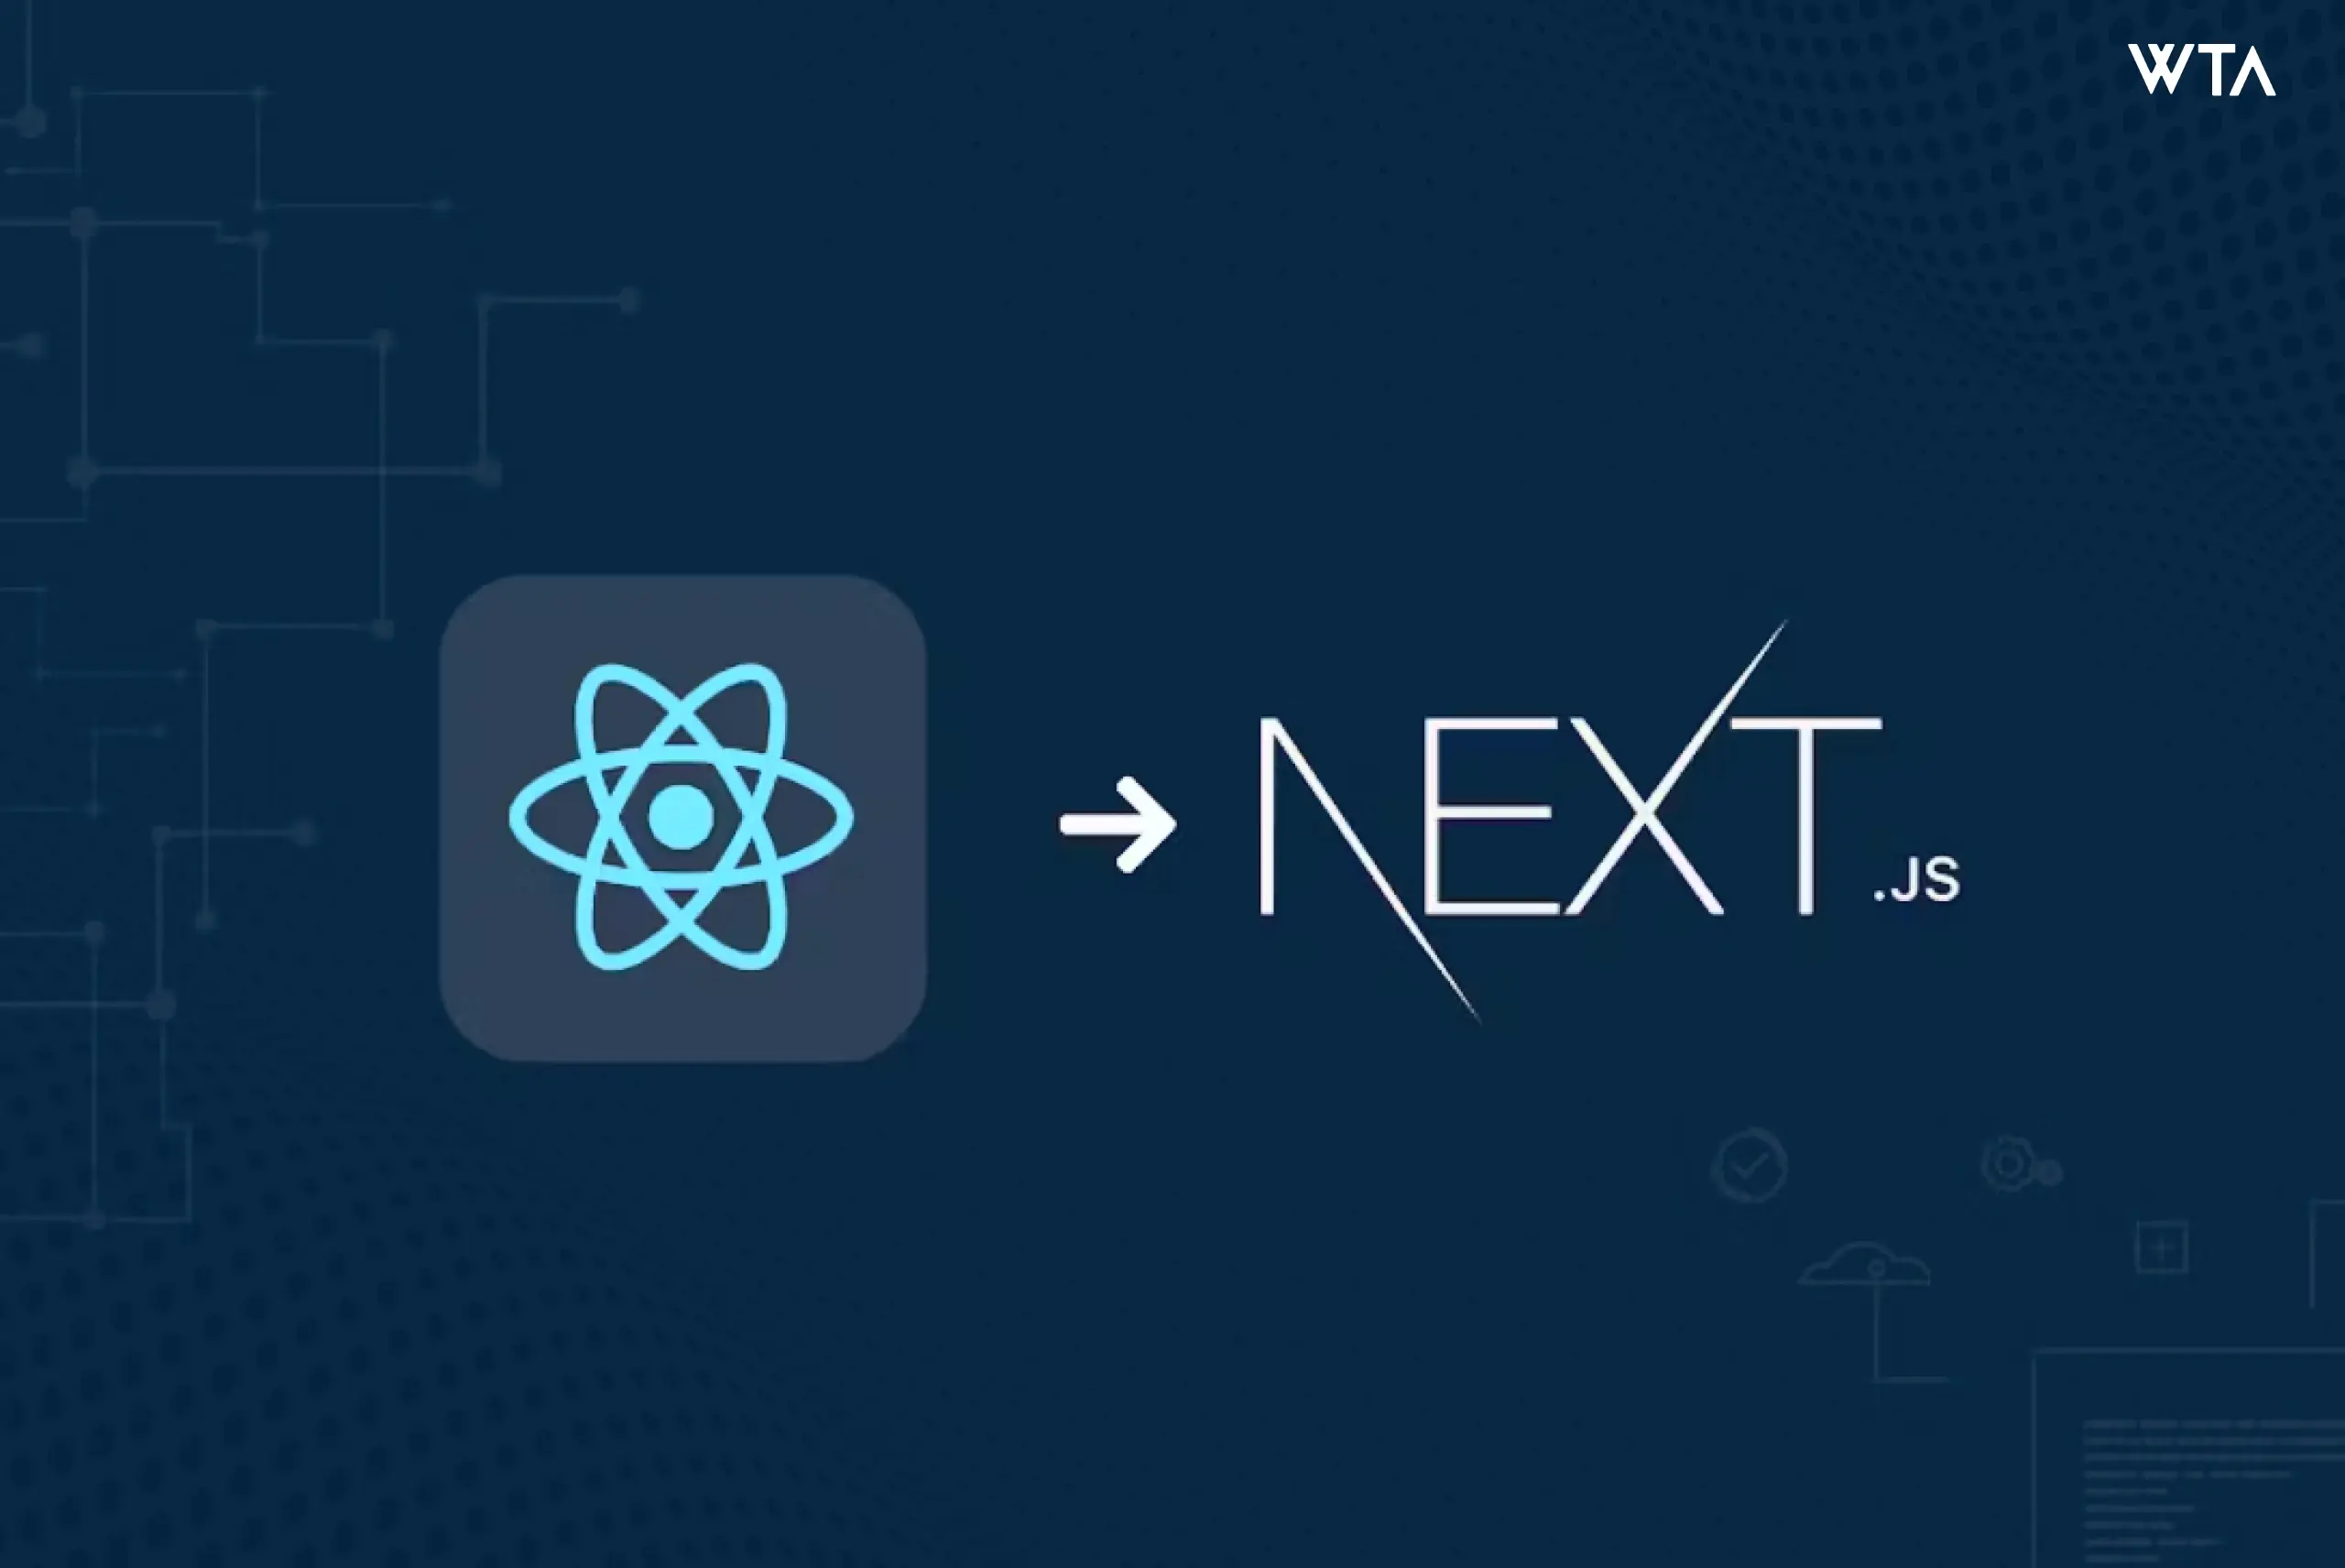 Why applications are migrating from Reactjs to Nextjs